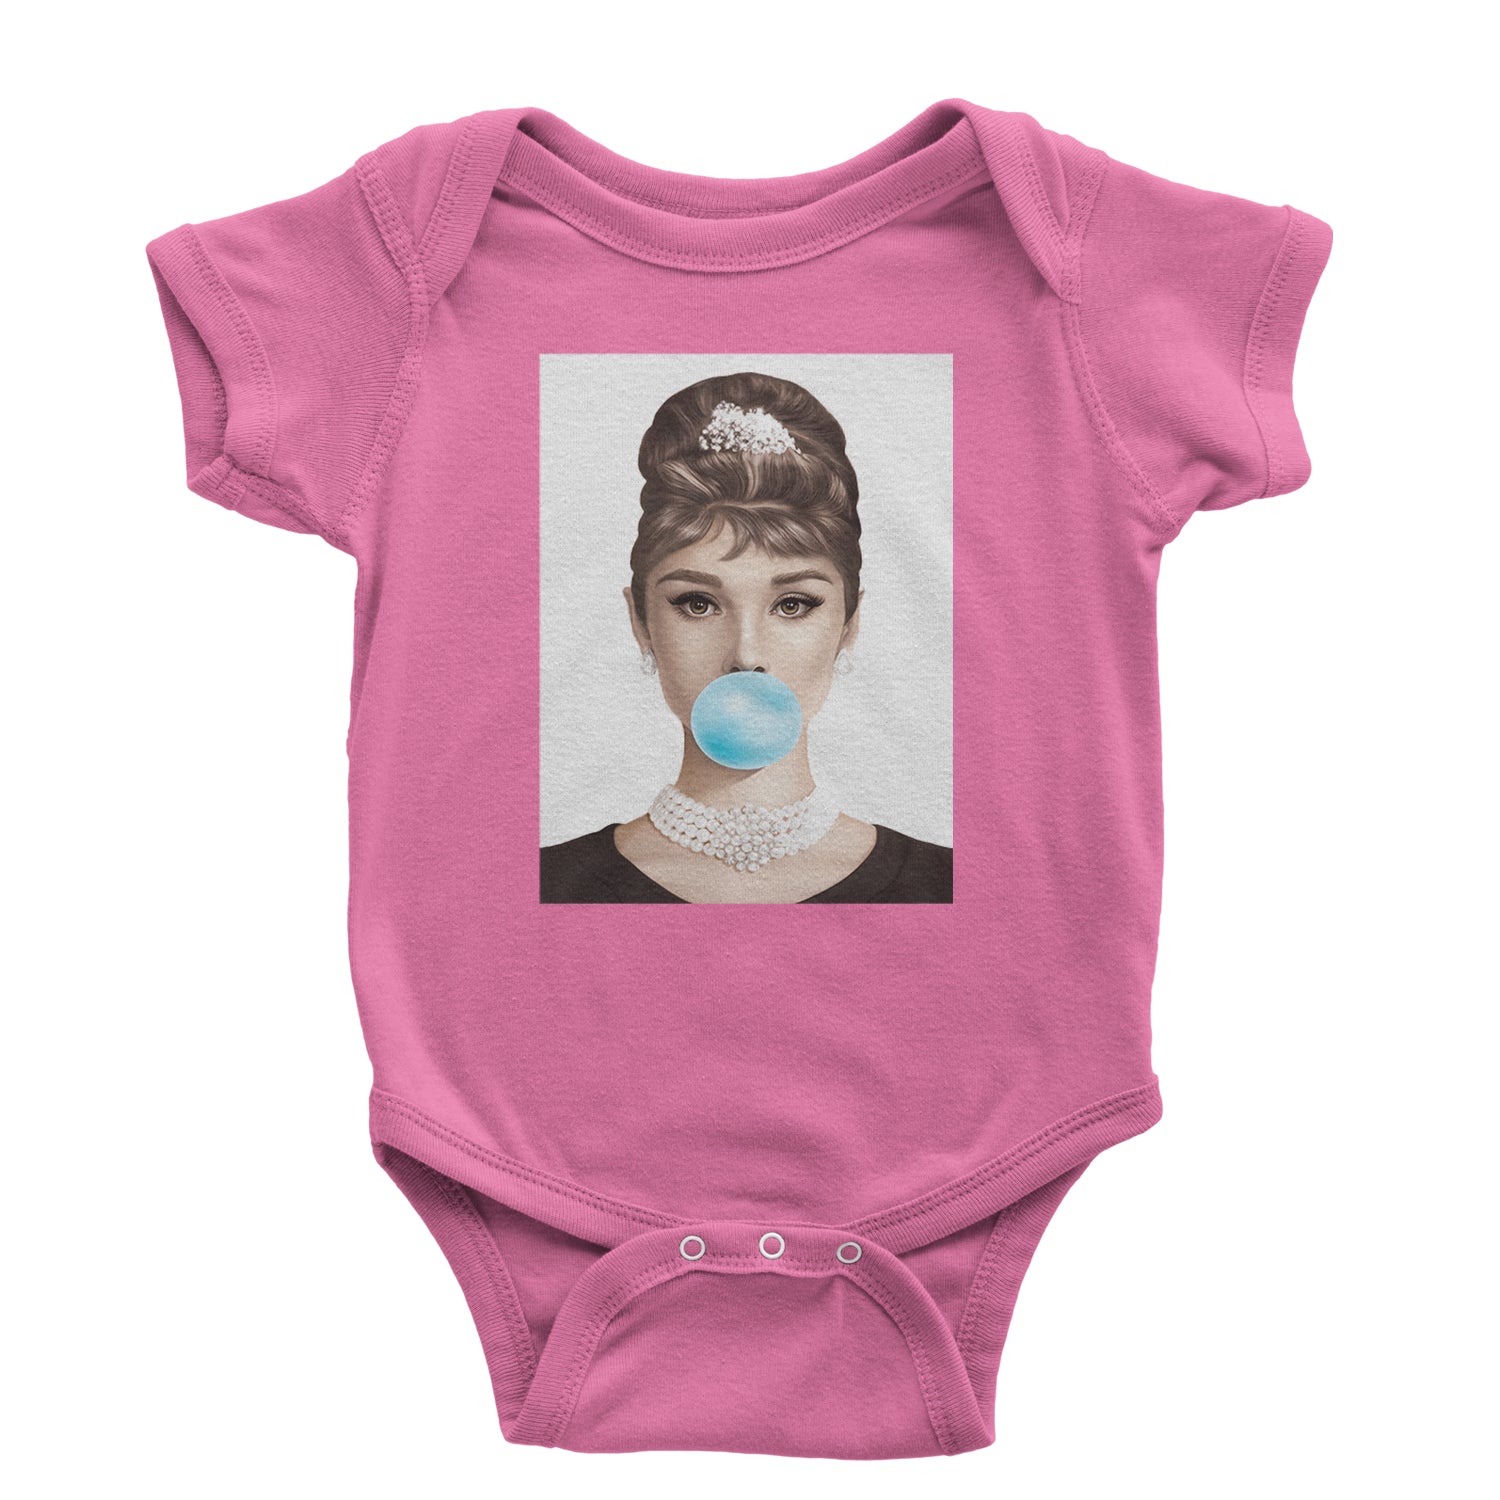 Audrey Hepburn Chewing Bubble Gum American Icon Infant One-Piece Romper Bodysuit and Toddler T-shirt